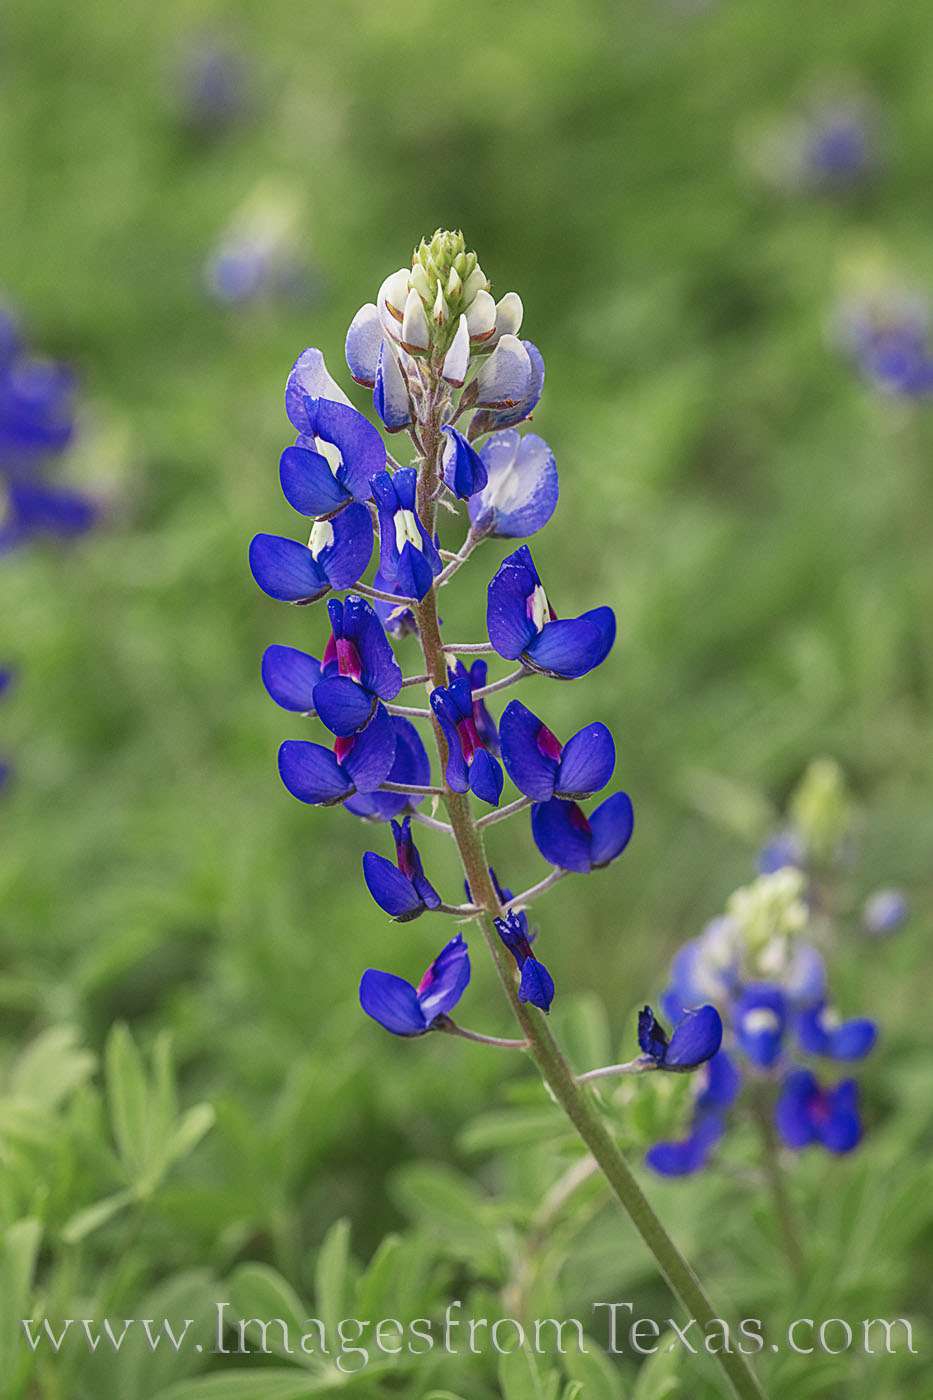 Lupinus texensis, or Texas bluebonnet, is a Texas favorite among wildflowers. It is also the official state flower of the Lone...